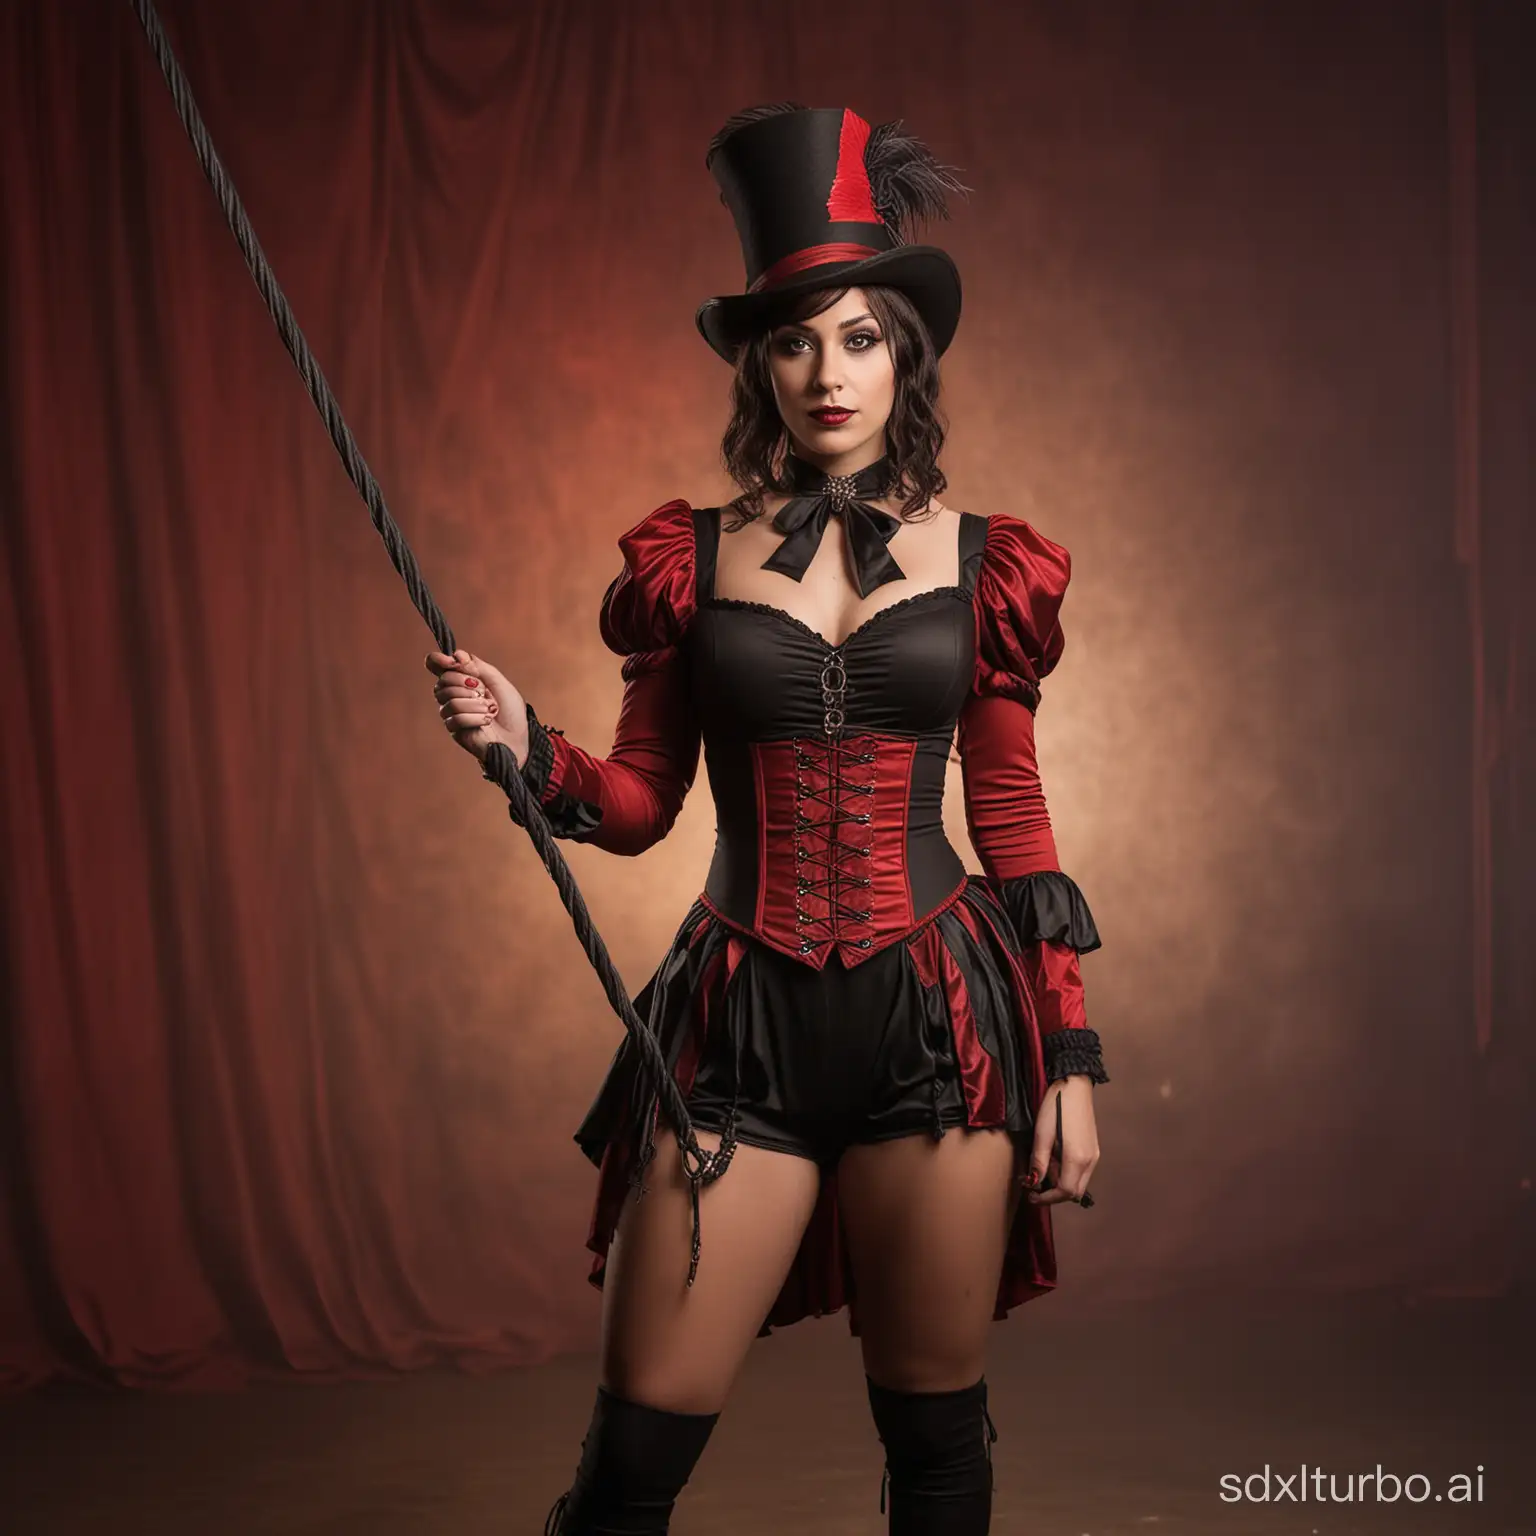 female circus ringleader, gothic outfit, brown skin, holding a whip, circus background